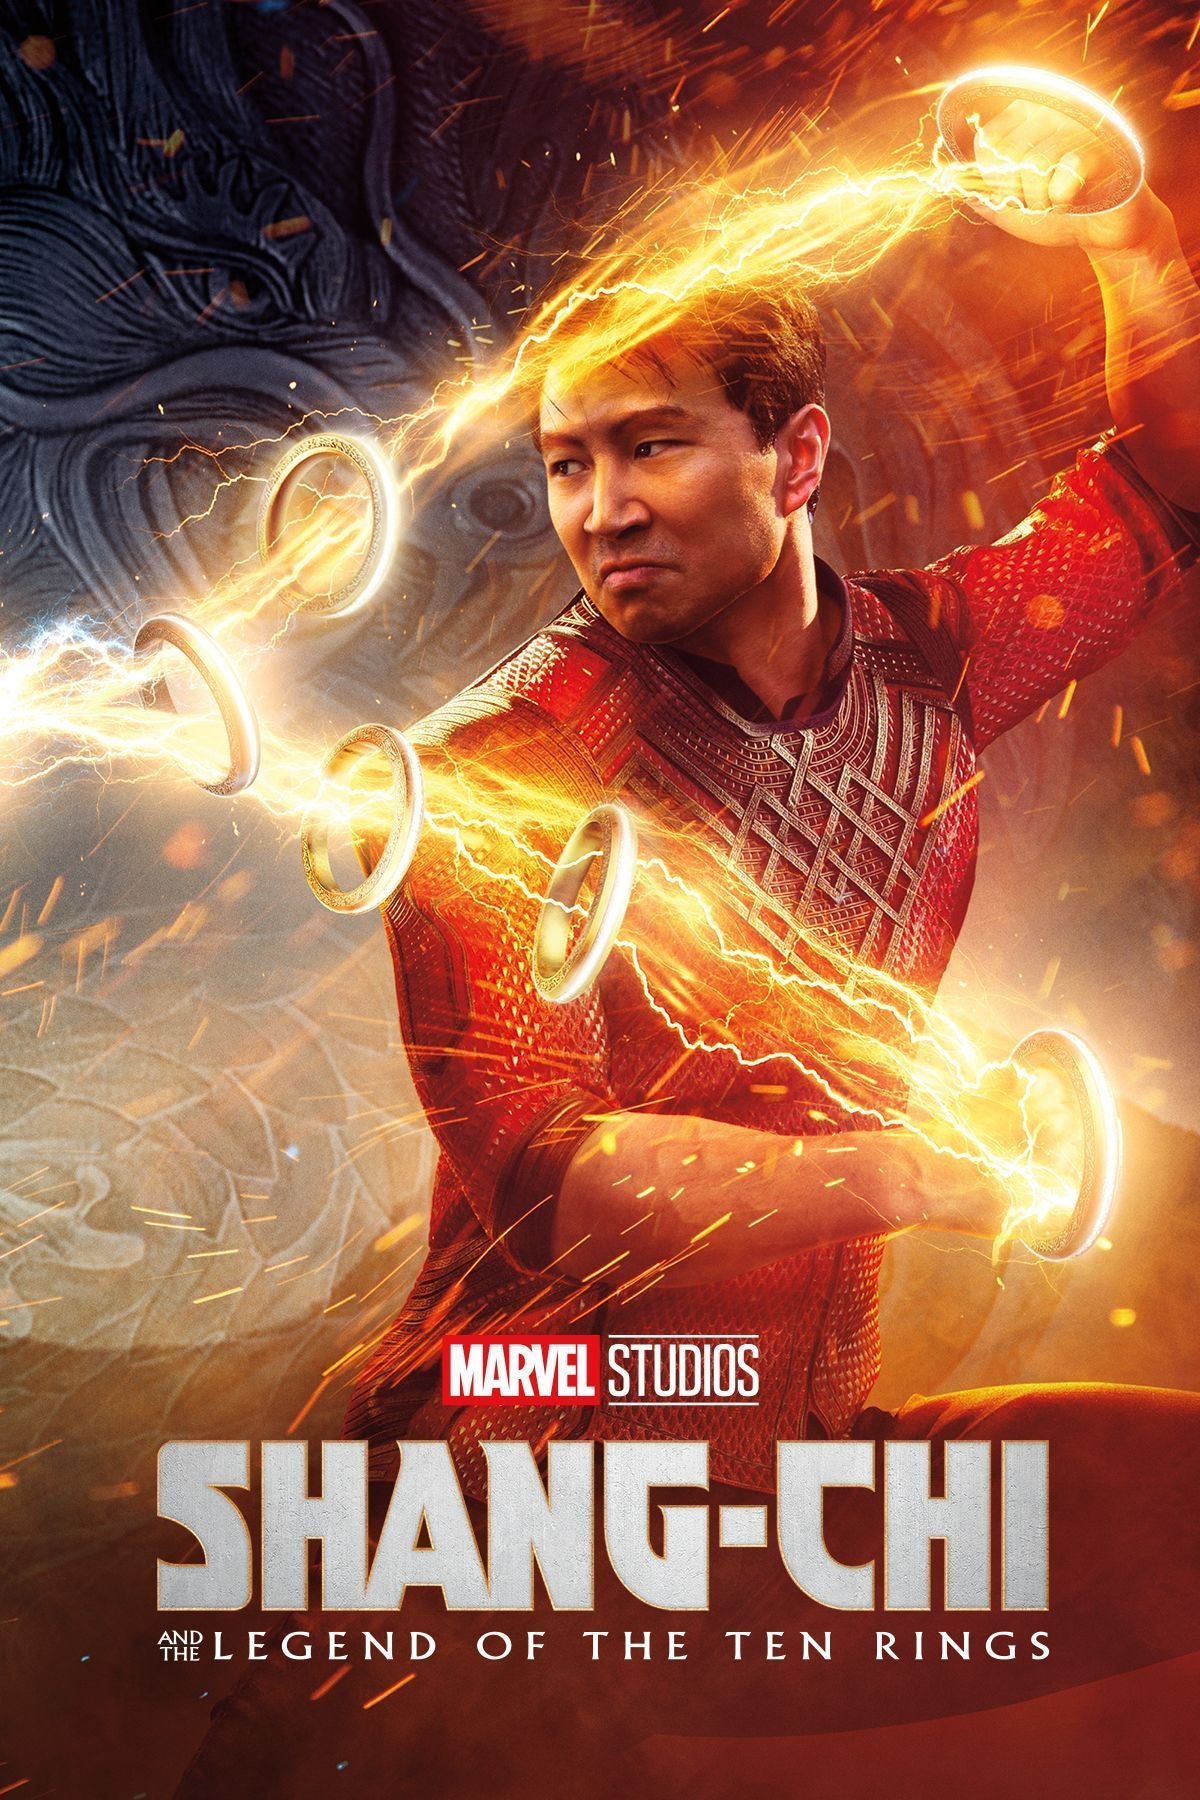 Shang-Chi And The Legend of the Ten Rings (2021) Vudu or Movies Anywhere HD redemption only